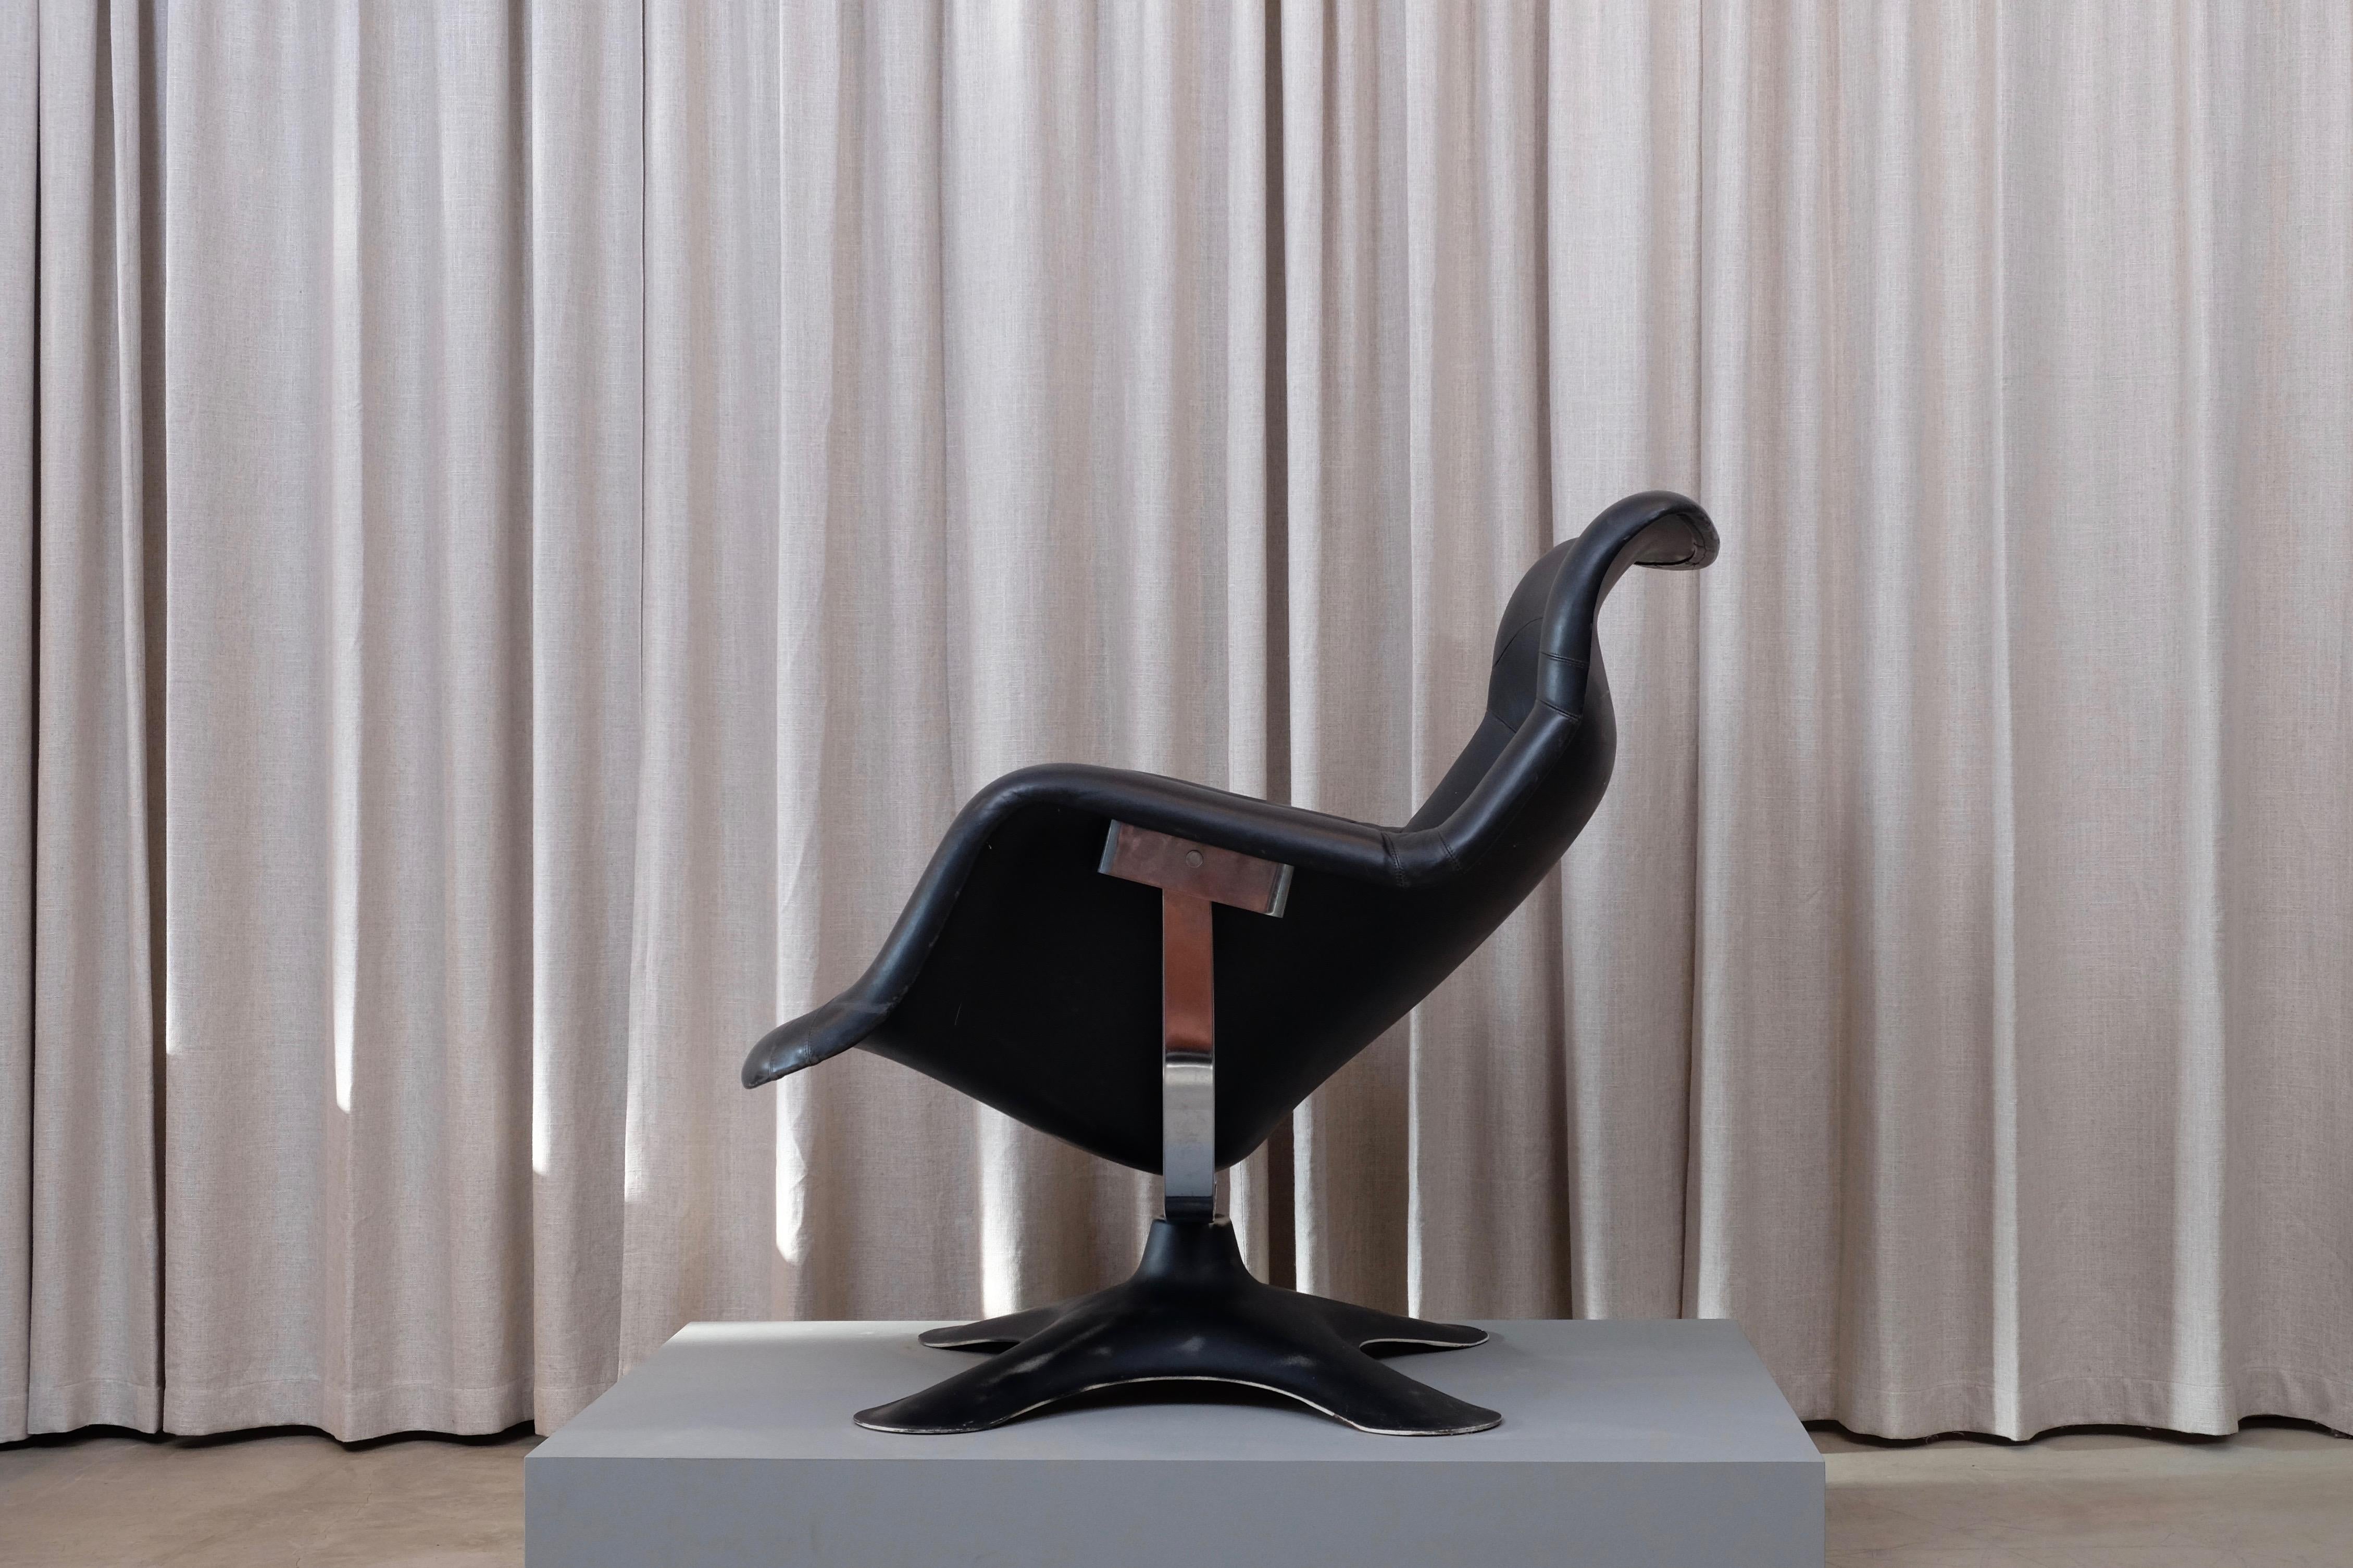 Very sought after Karuselli lounge chair in black designed in 1965 by Yrjö Kukkapuro, made by Haimi, Finland has a fiberglass seat shell and base. Exclusive manufactured leather upholstery, chrome and fiberglass in very good condition. Possibly the